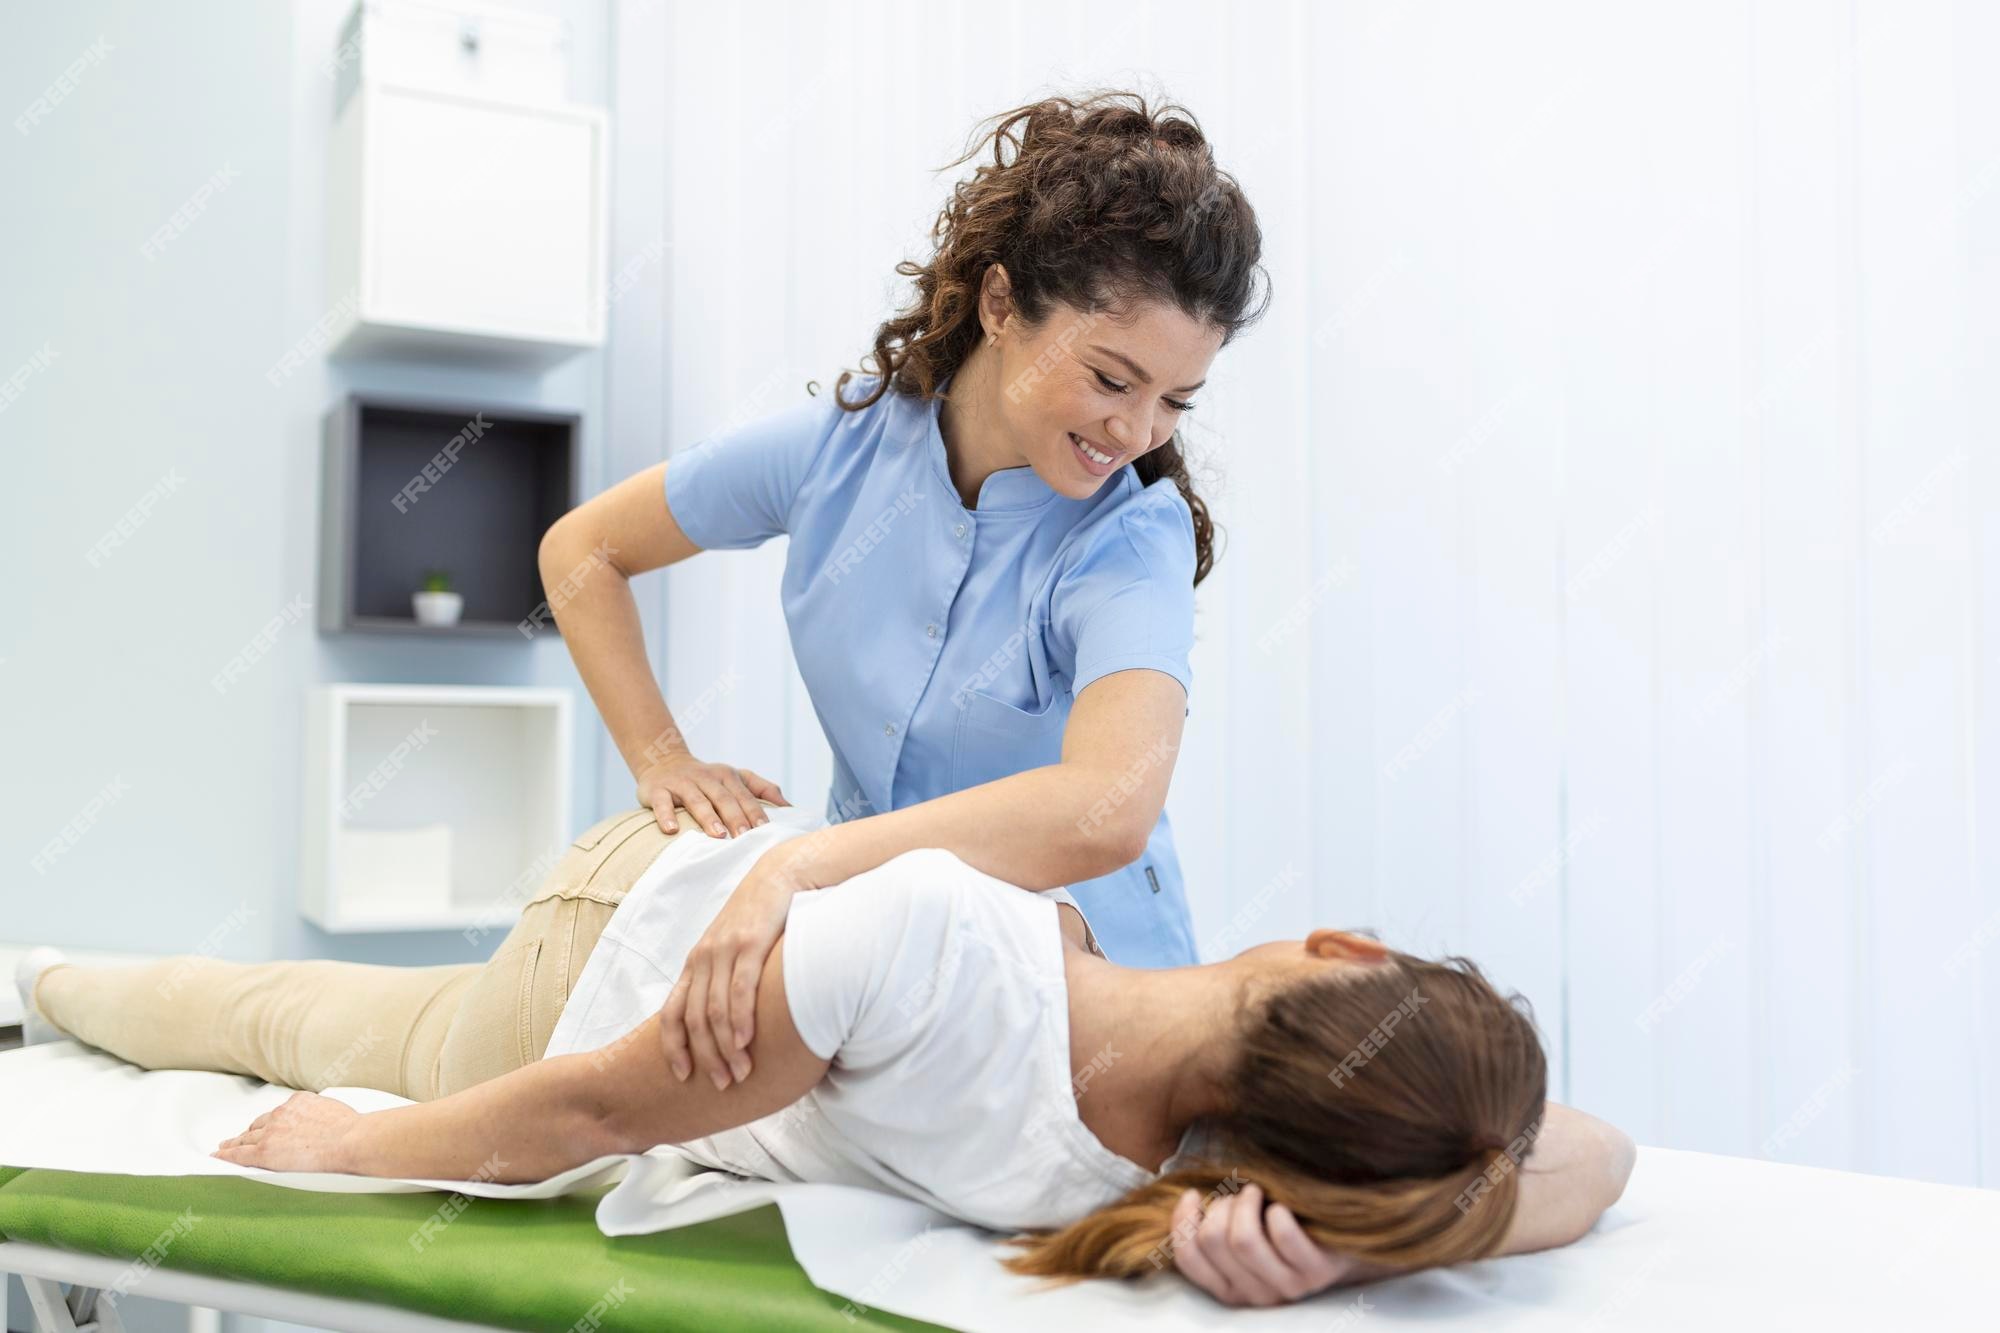 young woman doctor chiropractor osteopath fixing lying womans back with hands movements during visit manual therapy clinic professional chiropractor during work 657921 303